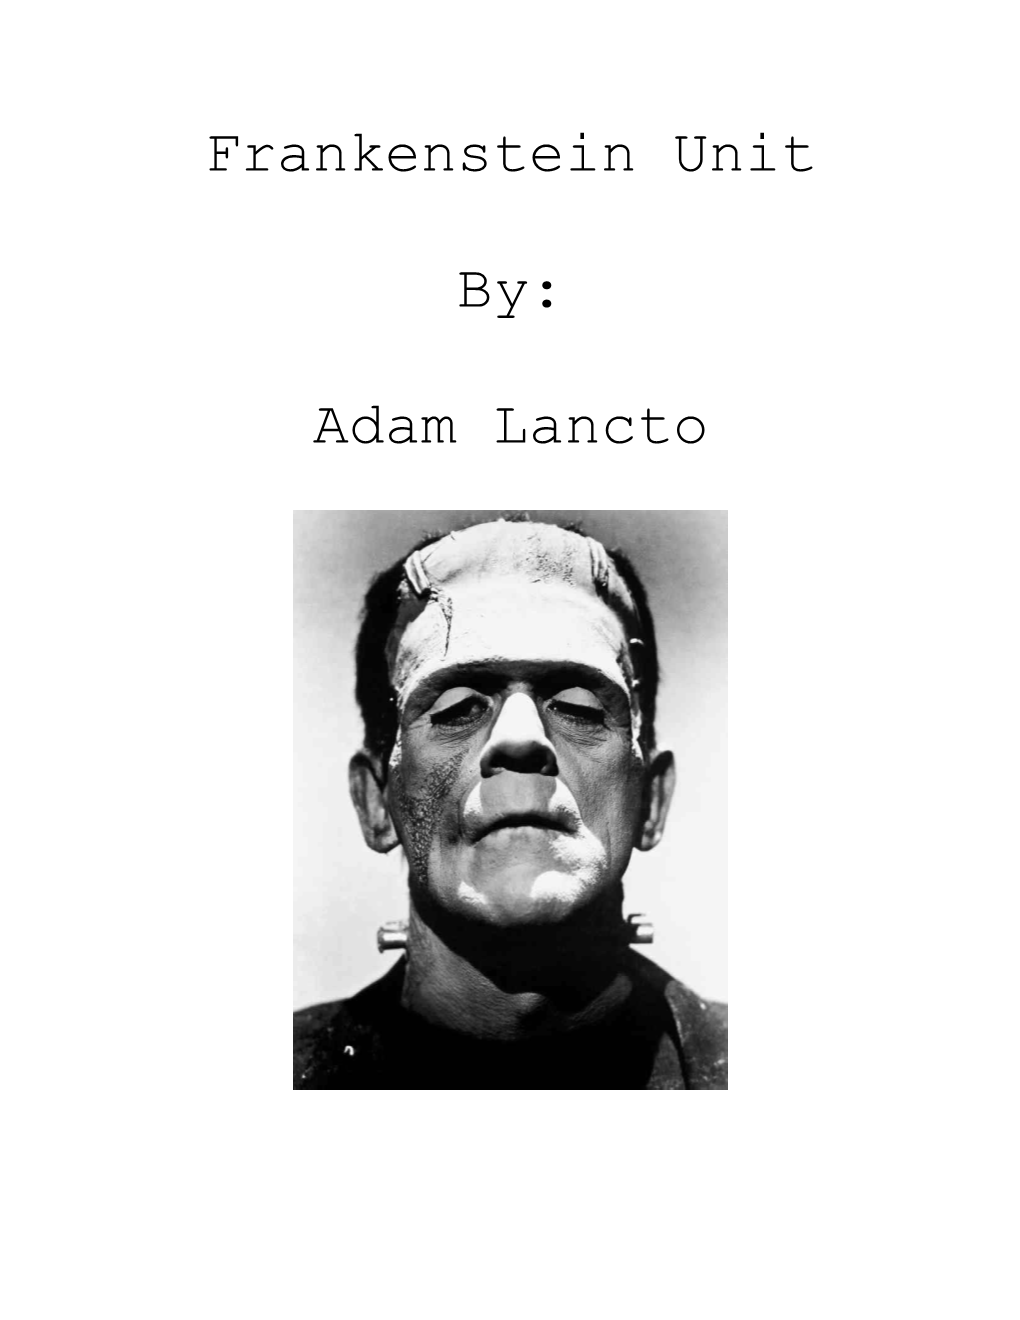 This Unit Has Been Developed To Enhance Student’S Skills In Reading, Writing, Critical Thinking, Vocabulary, And Comprehension Through Exercises And Assignments Related To The Novel Frankenstein By Mary Shelley